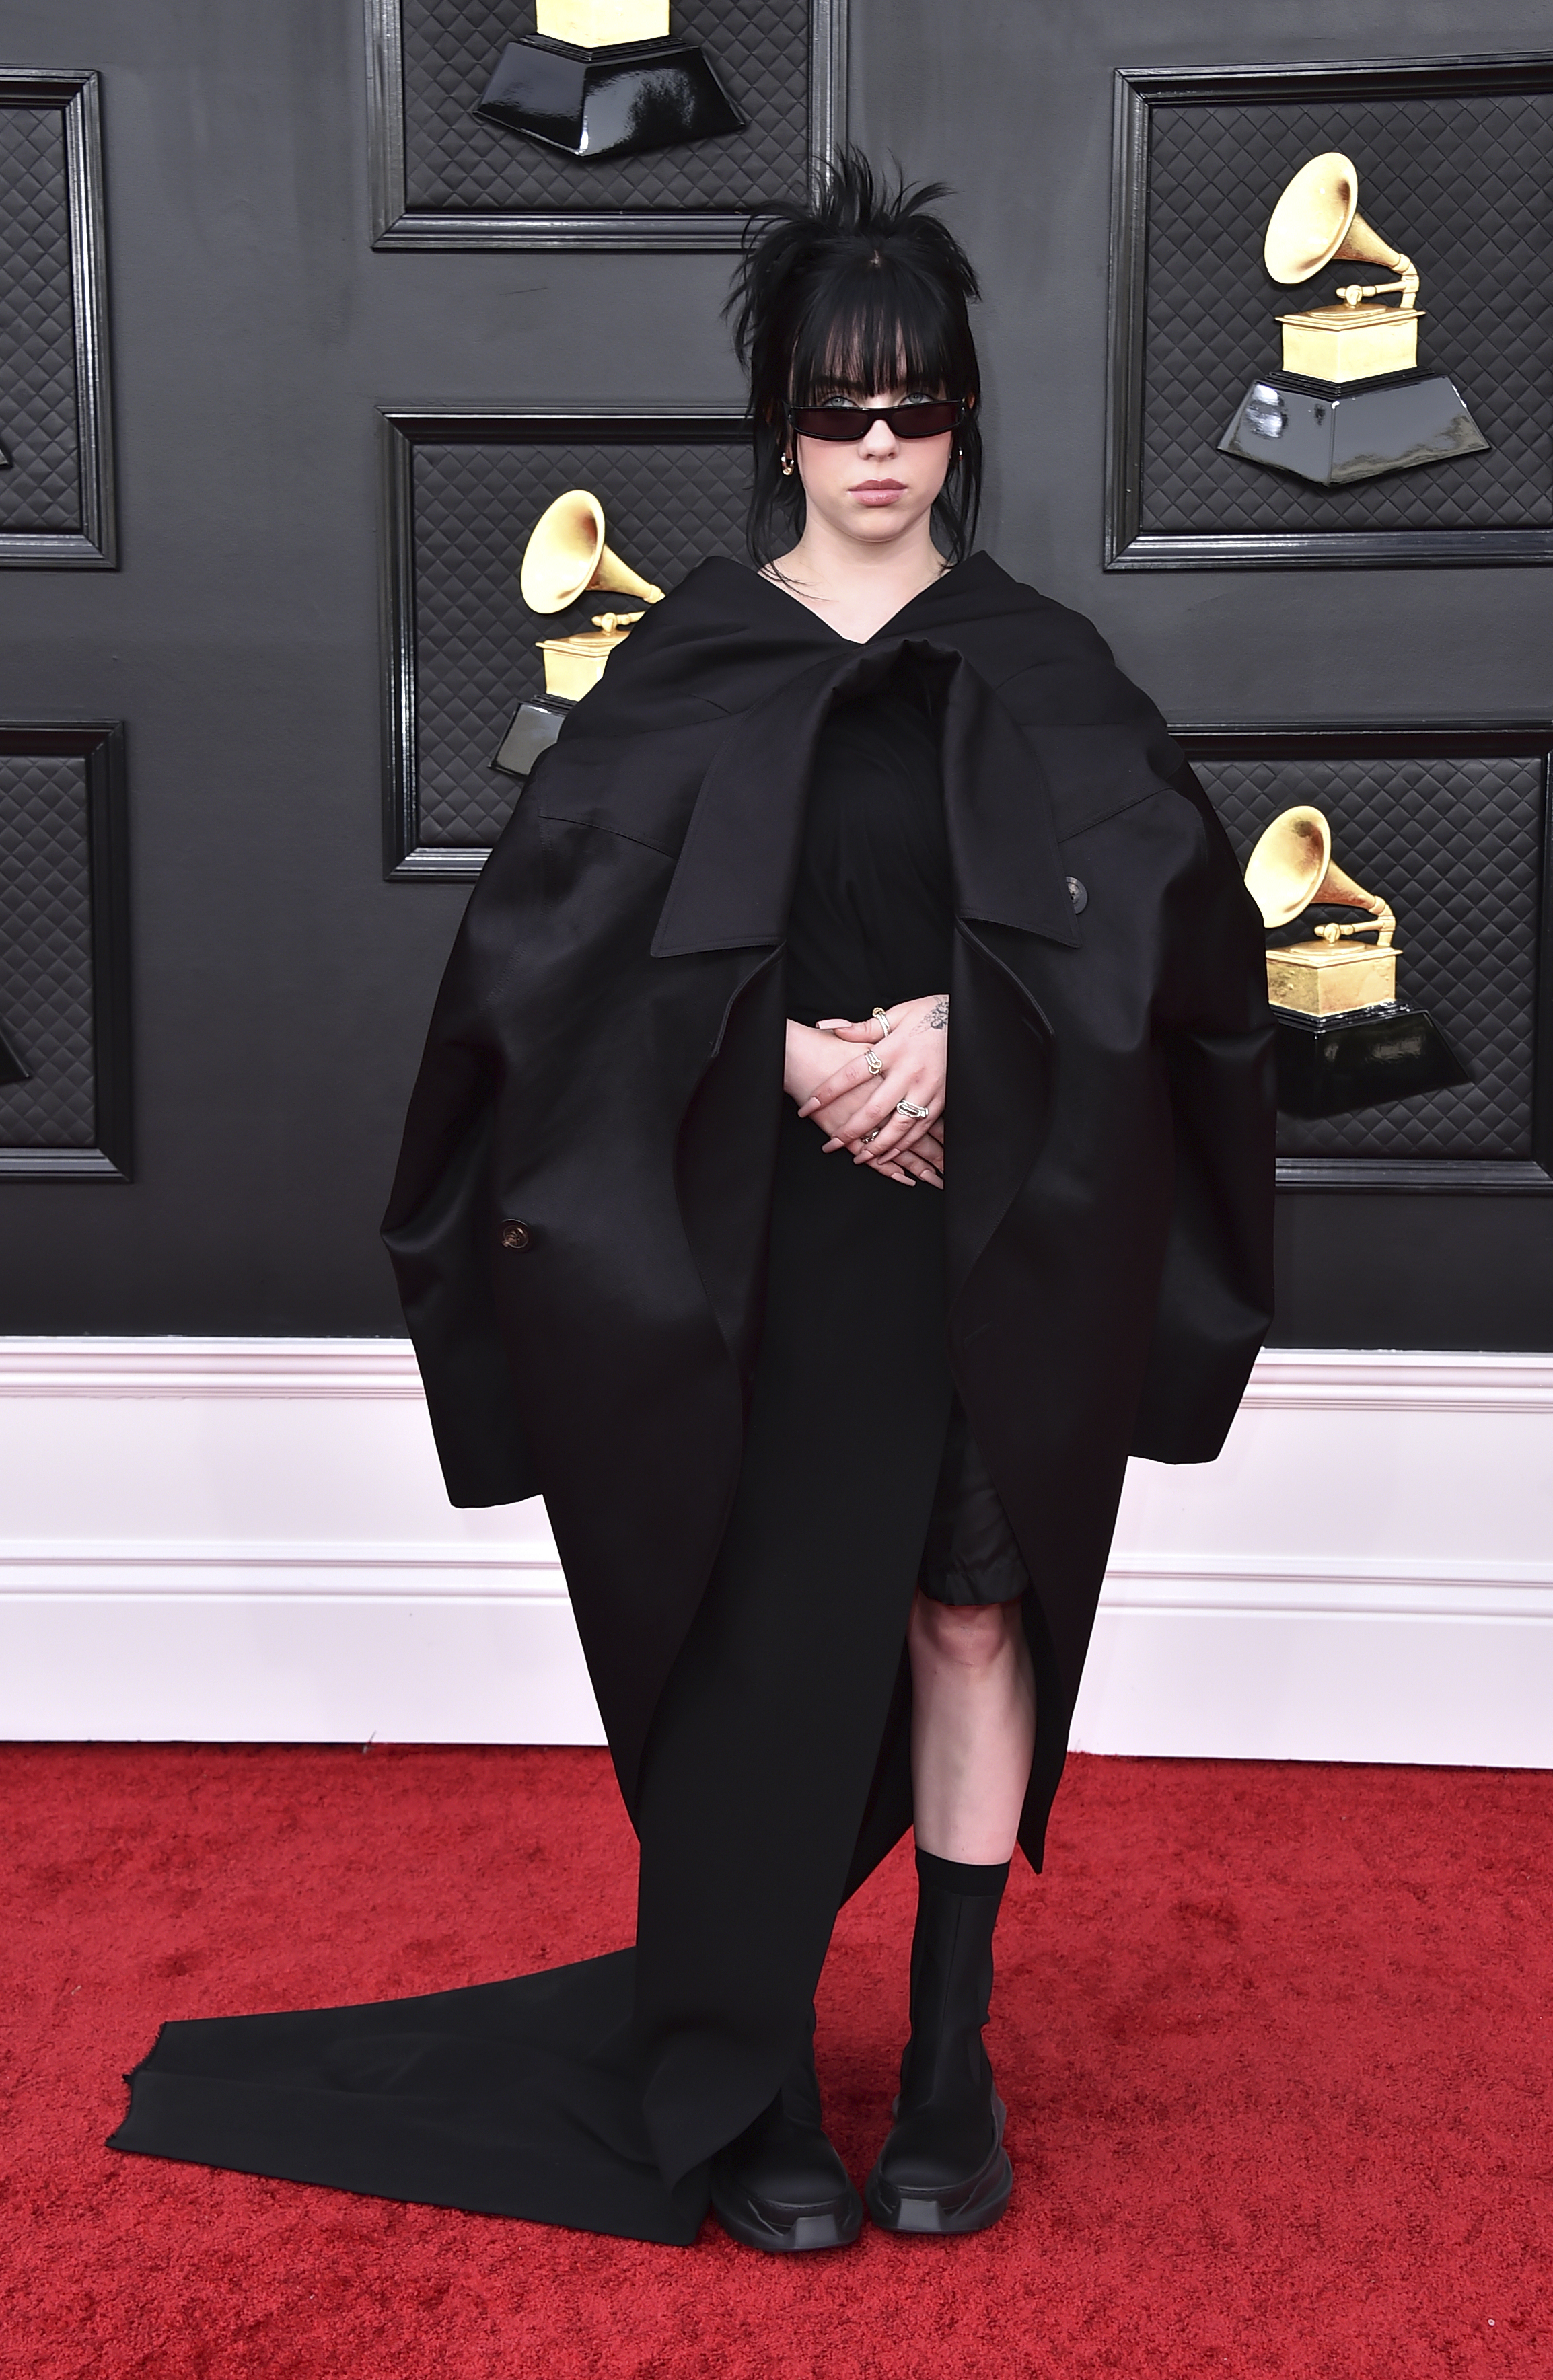 billie eilish on the red carpet wearing a long black cloak and black sunglasses